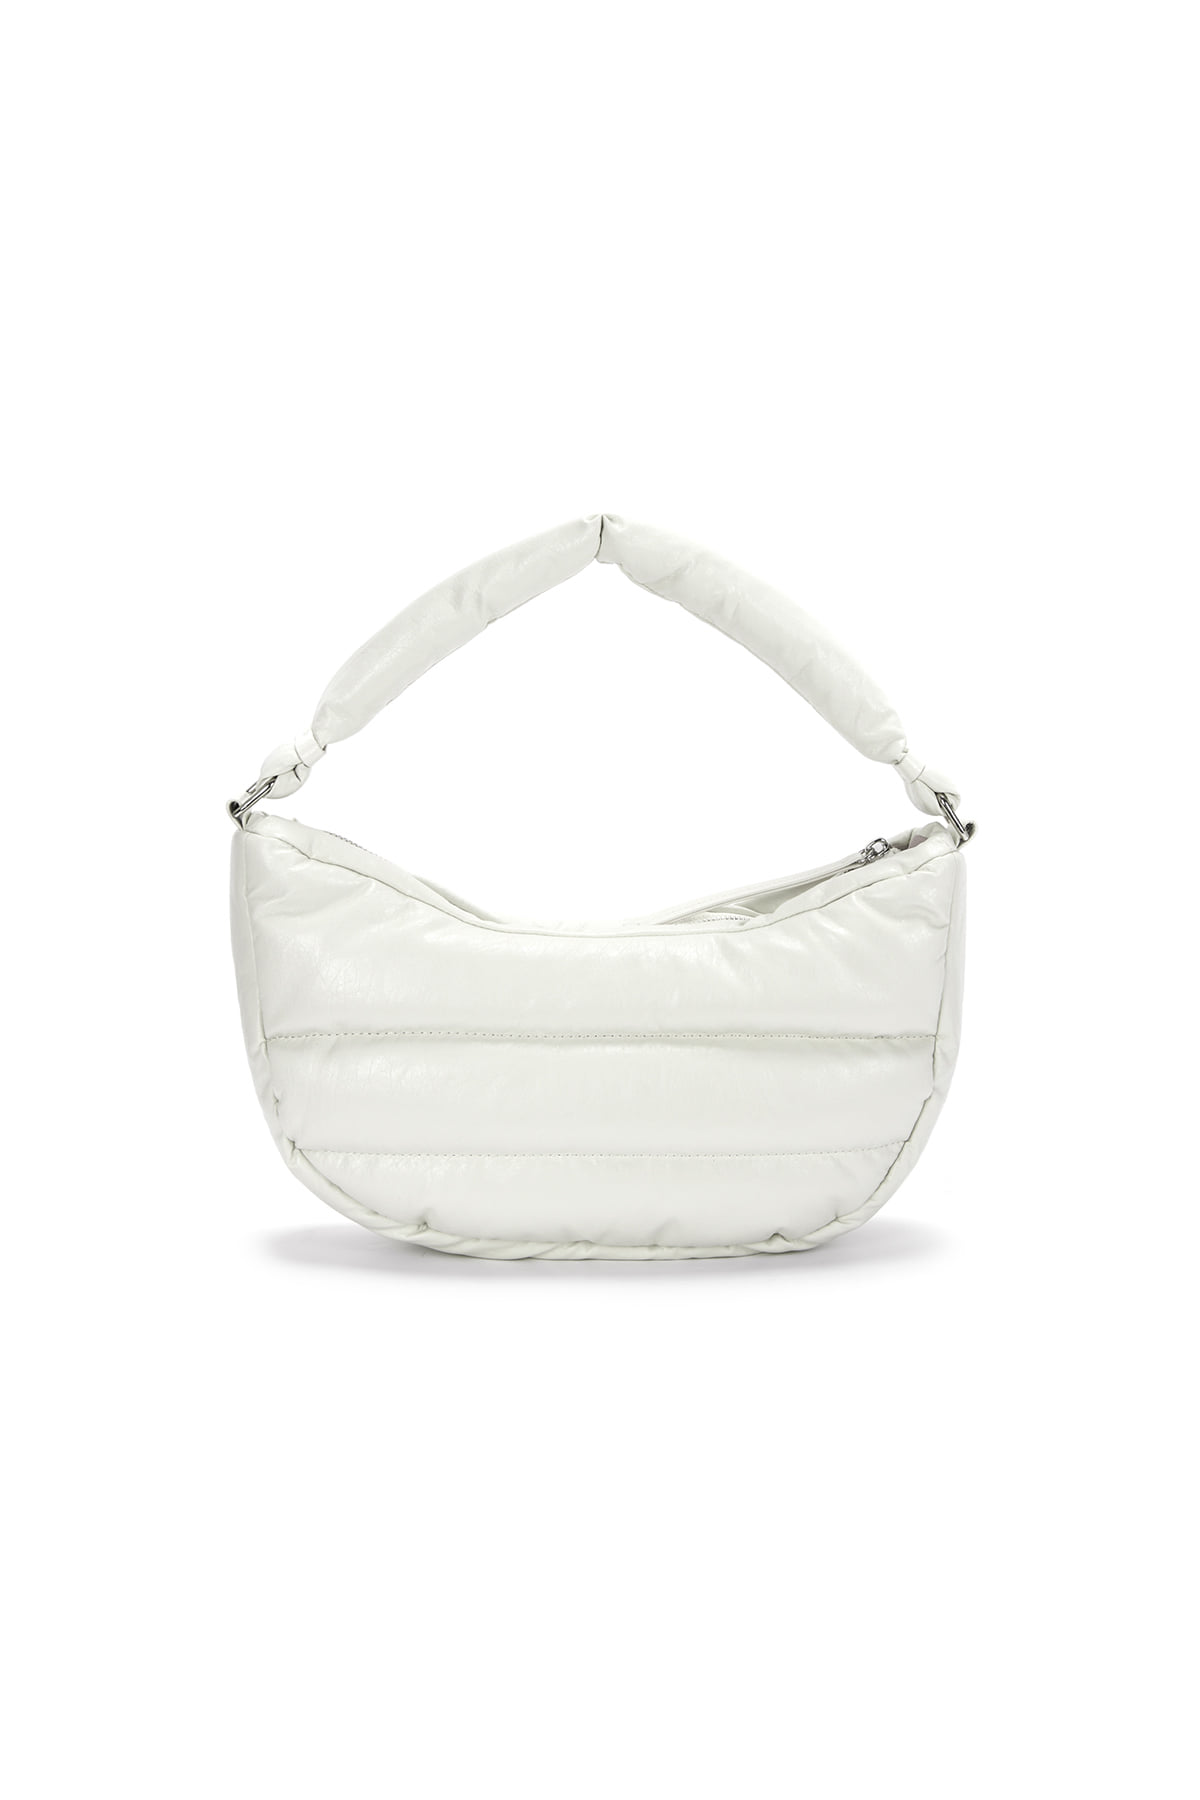 FAUX LEATHER HALF MOON MIDDLE PADDING BAG IN IVORY